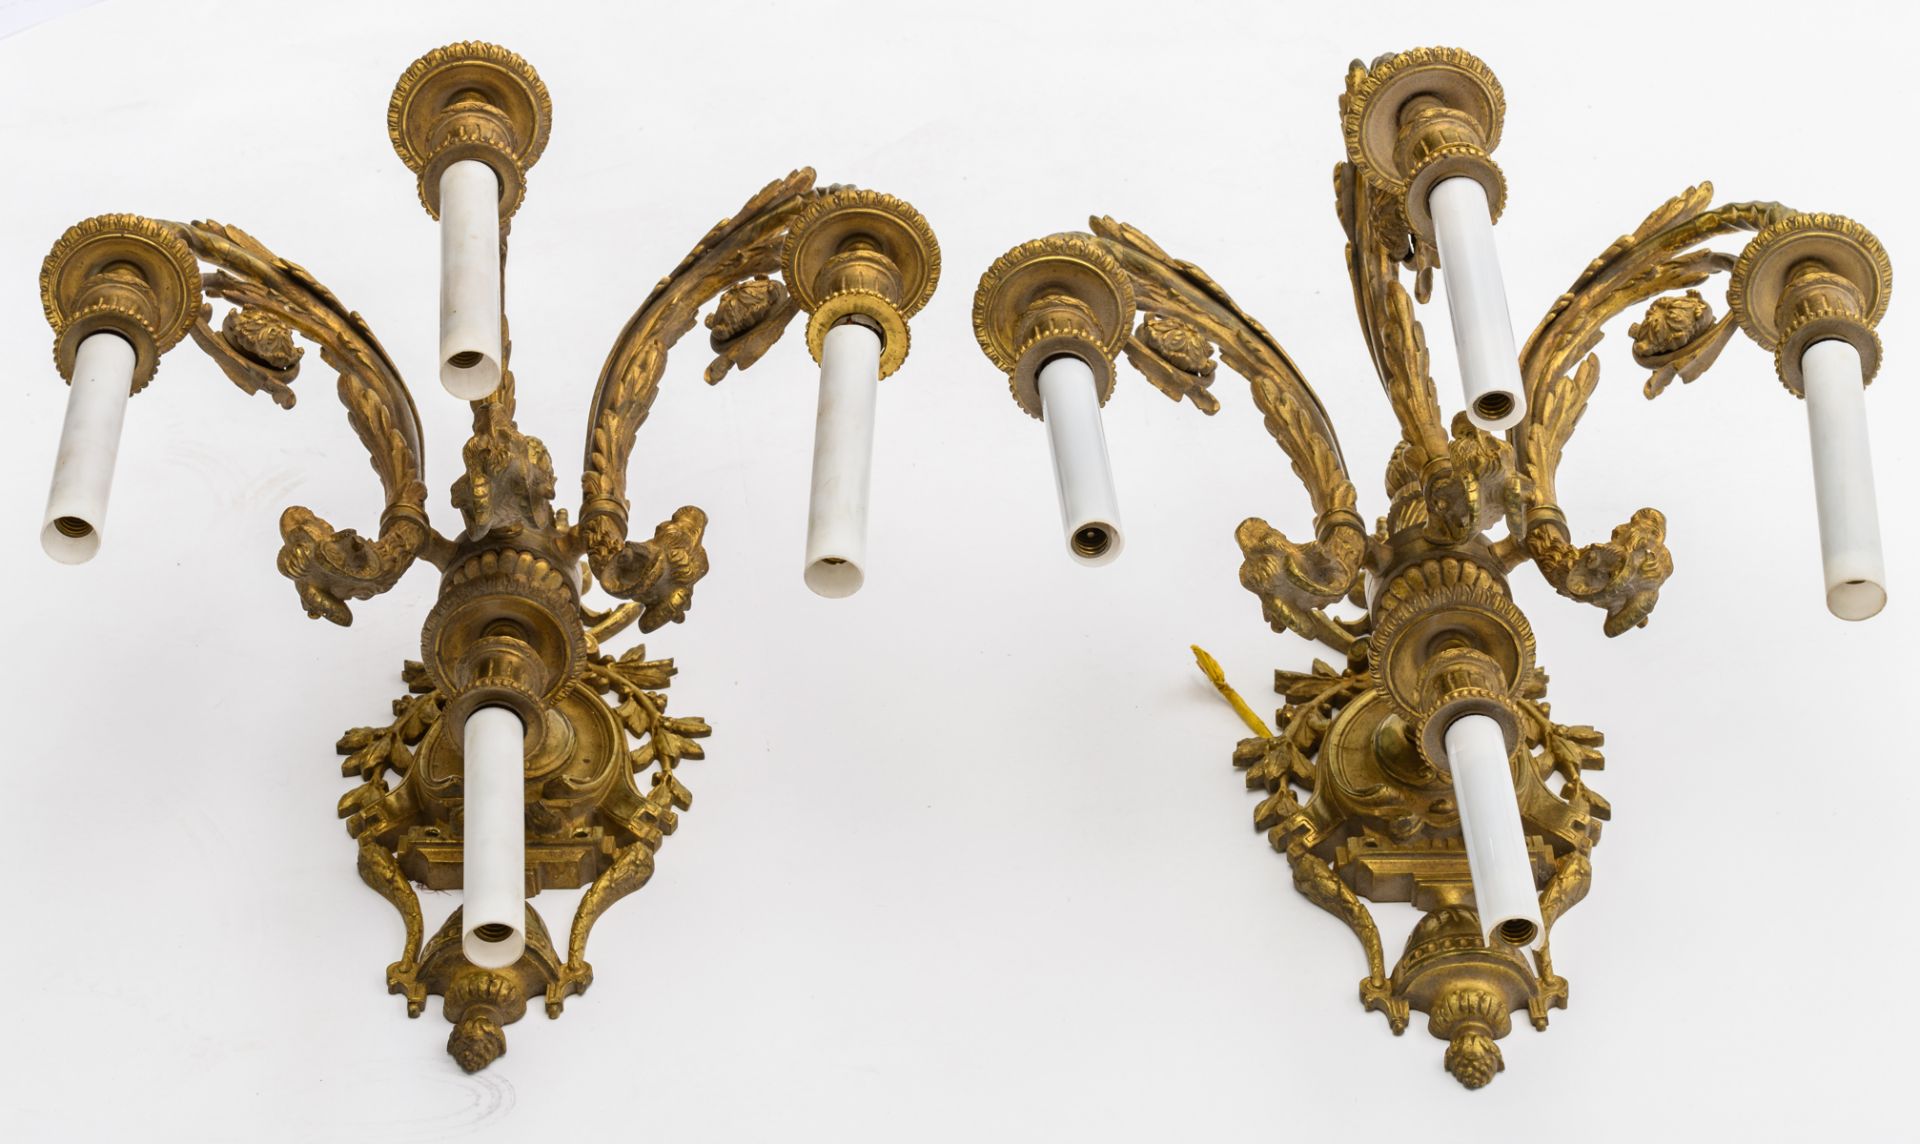 A nice pair of 19thC gilt bronze neoclassical wall sconces, the crest of the arms shaped as rams - Image 3 of 5